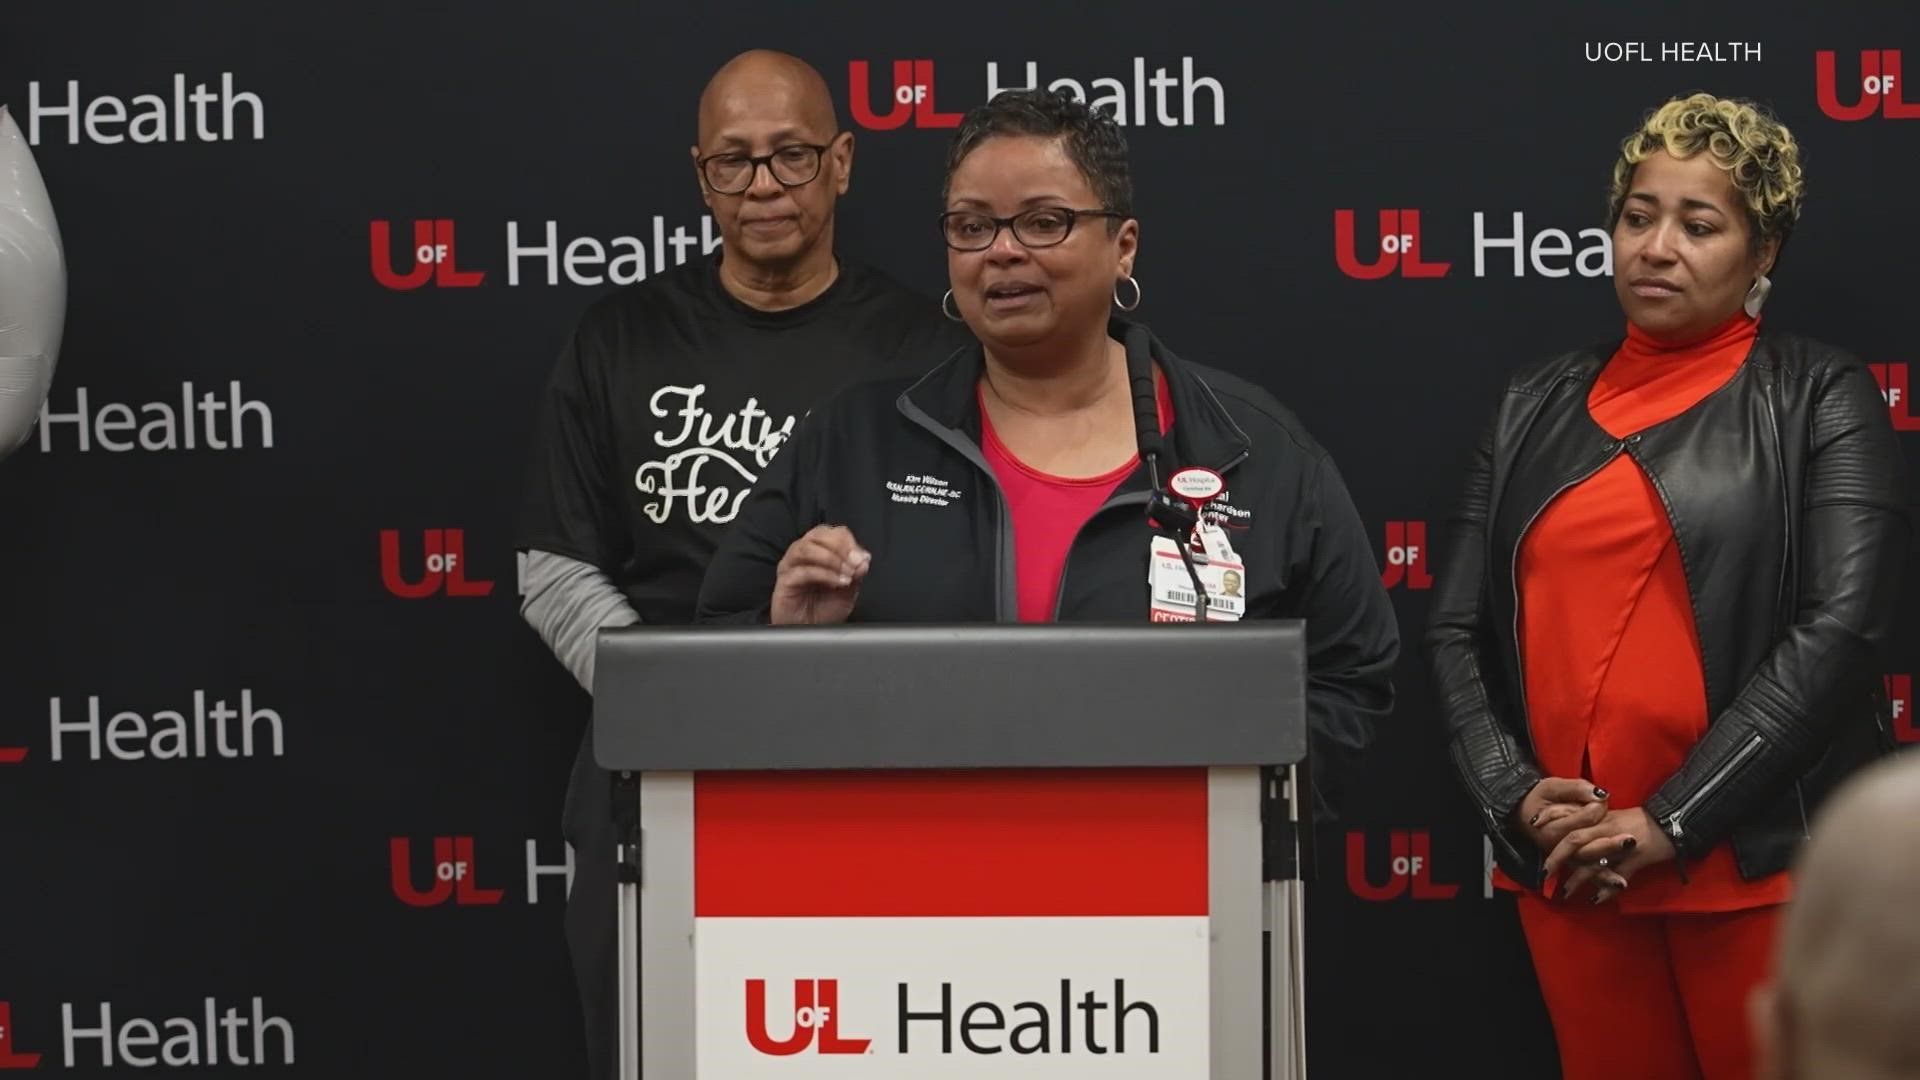 The 3rd annual Kelsie small future healer award  was presented to Kim Wilson, a registered nurse and the director of critical care services at UofL Health.